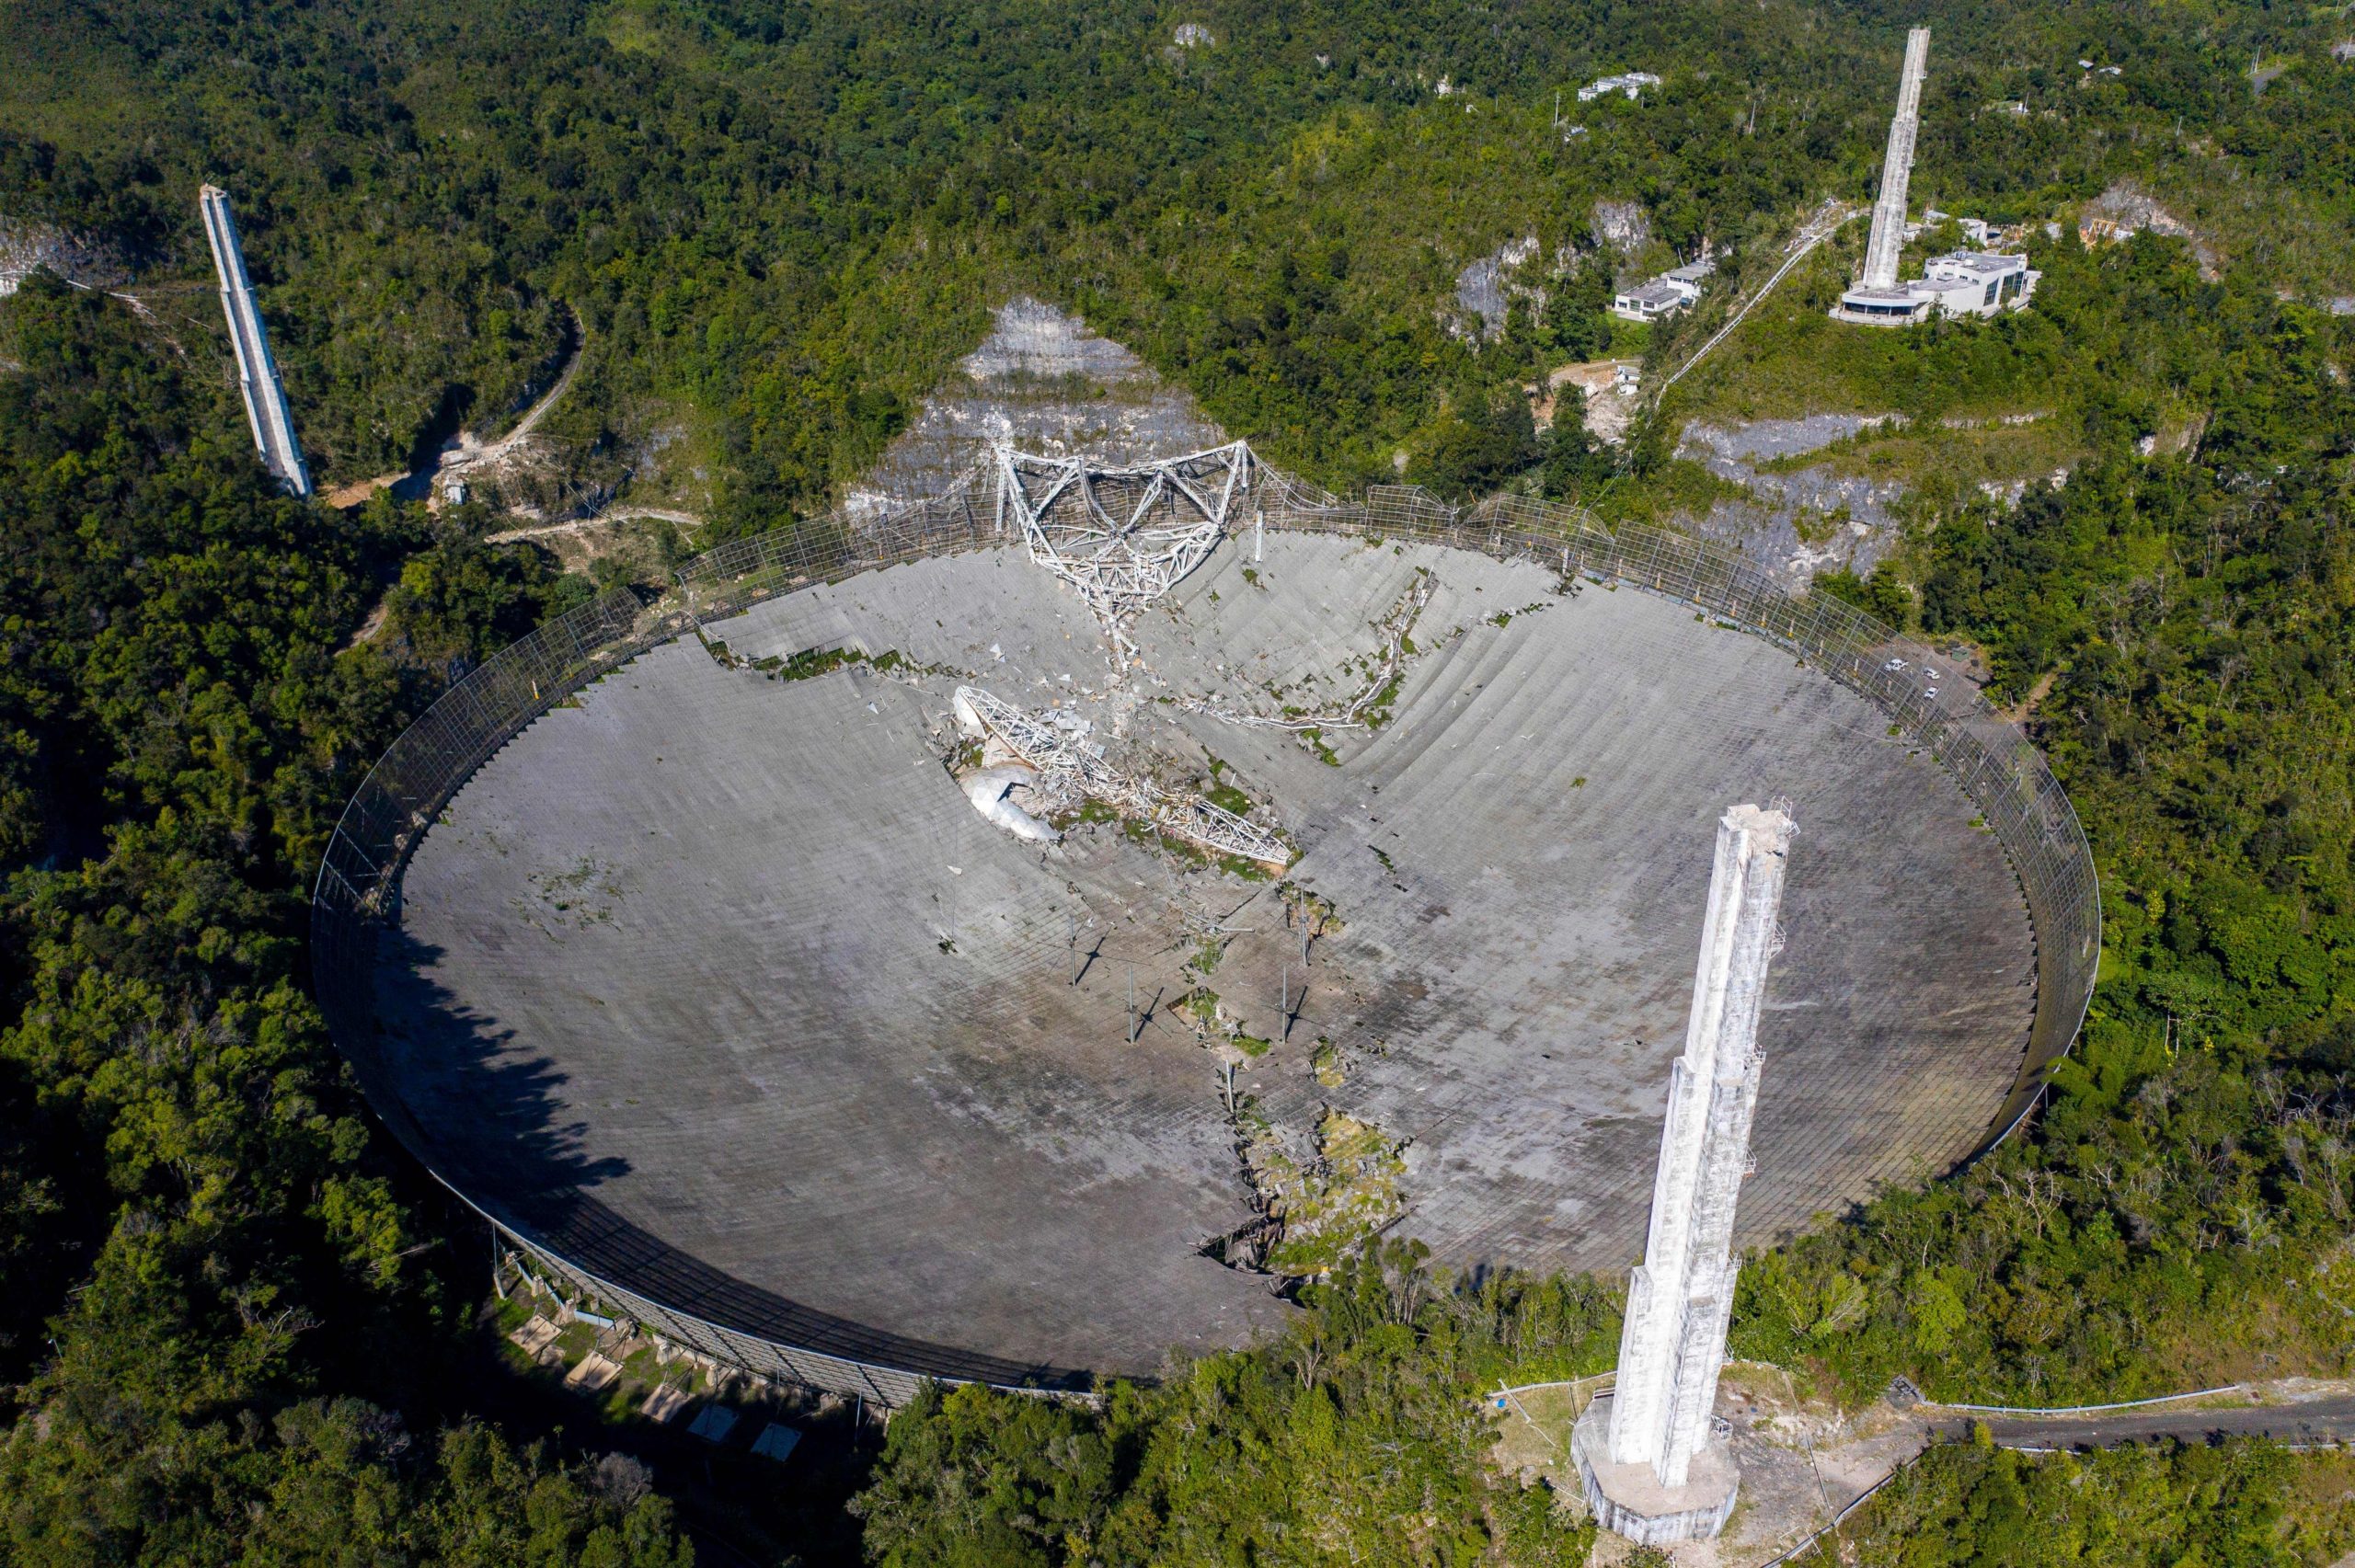 Aerial view showing extensive damage to the large radar dish, as well as the position of the fallen instrument platform. The collapse also ripped off the tops of the three support towers.  (Image: Ricardo Arduengo/AFP via Getty Images, Getty Images)